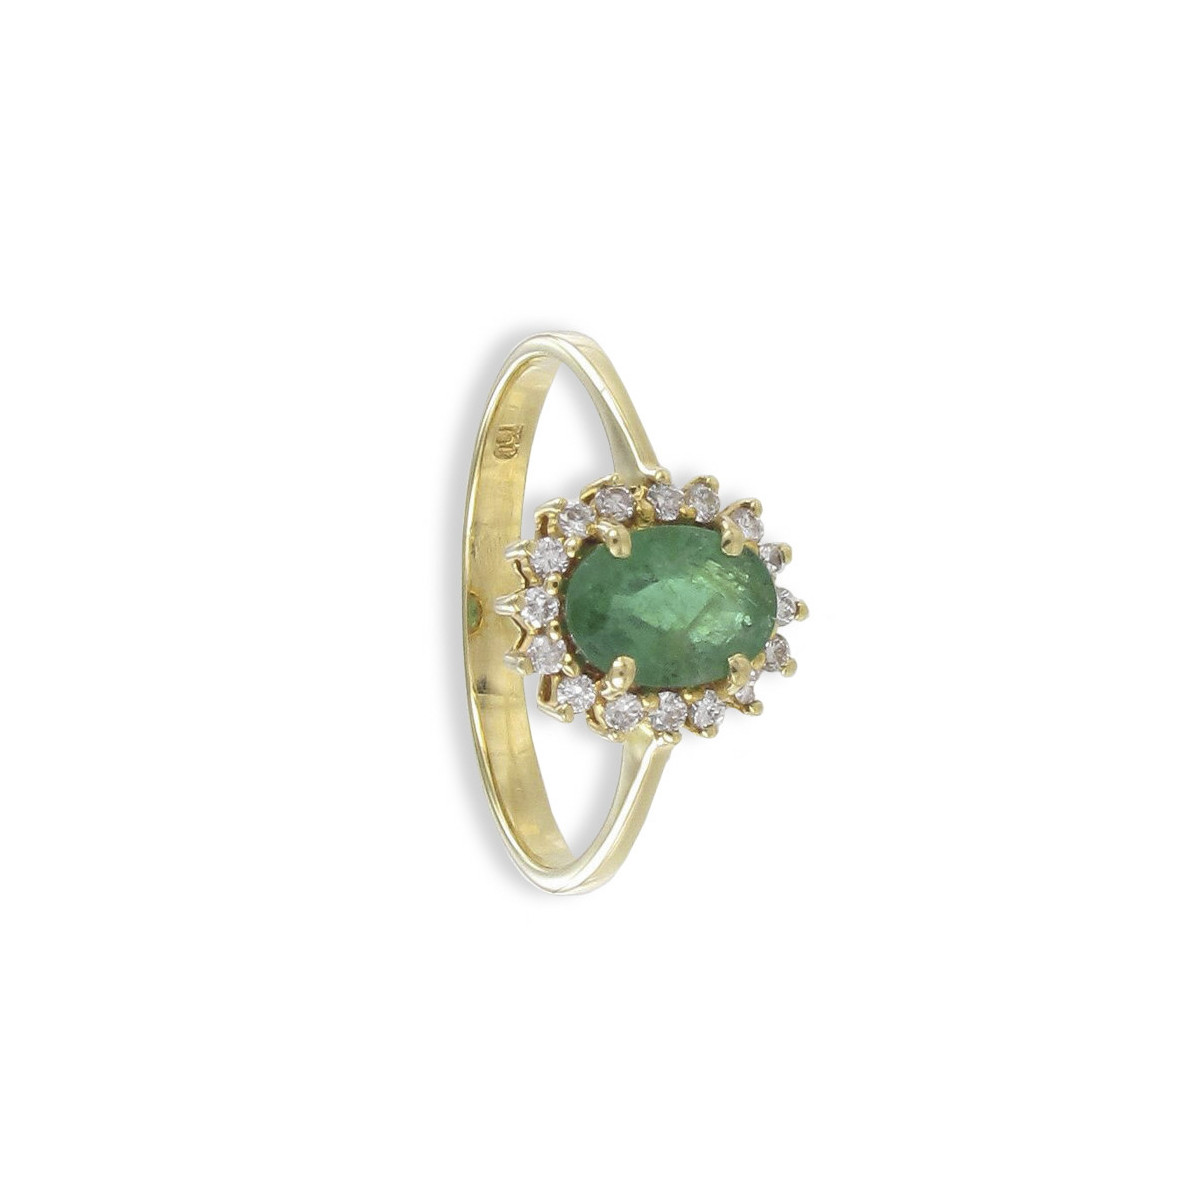 GOLD EMERALD AND DIAMOND RING